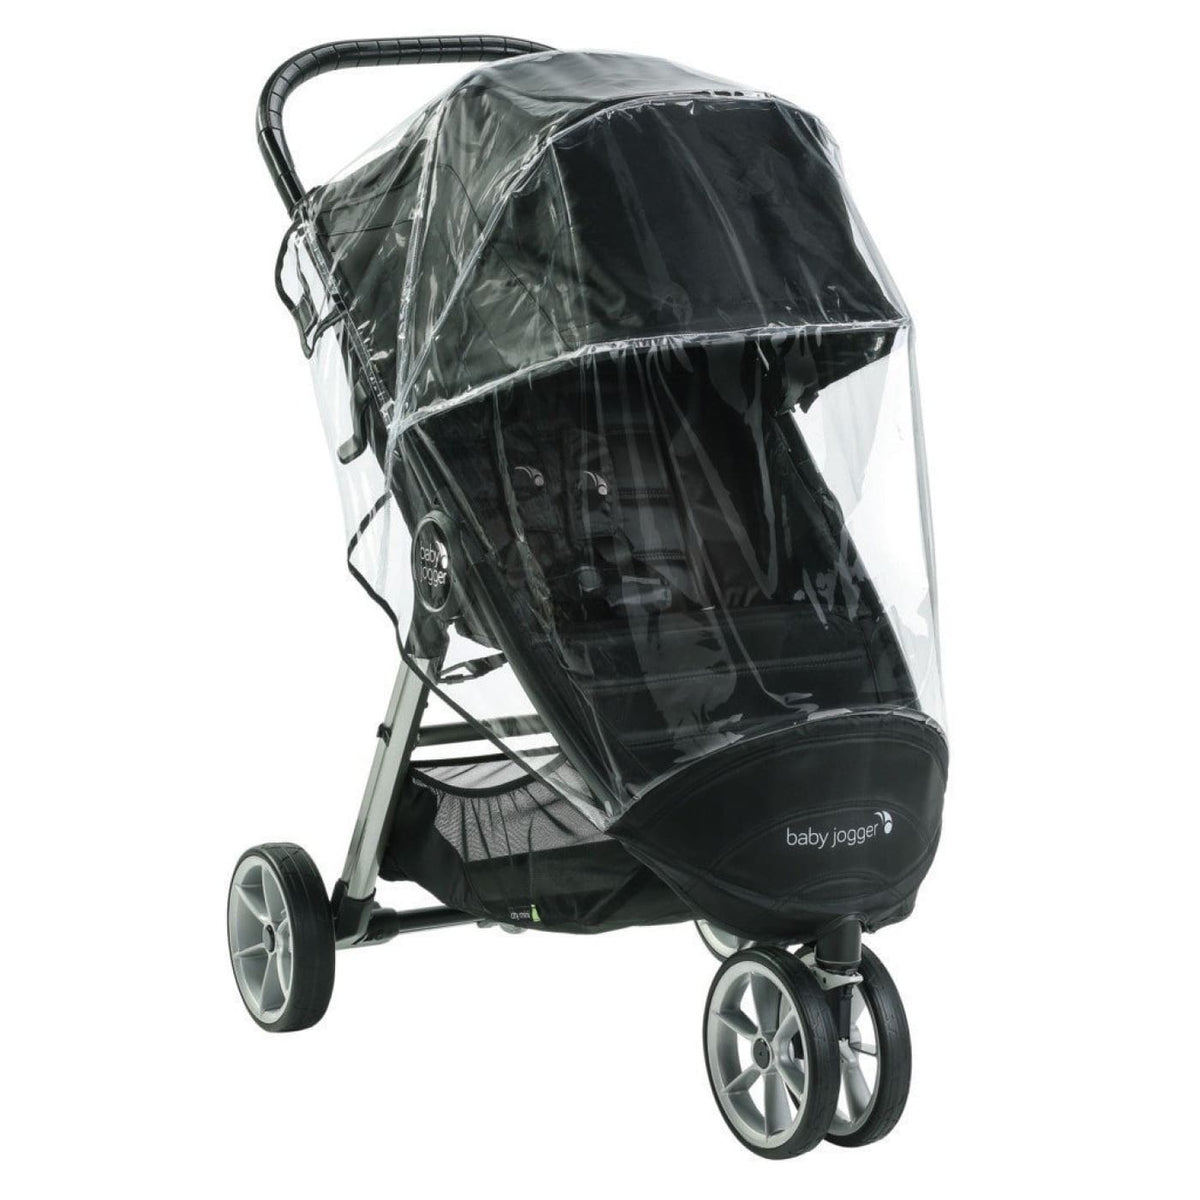 Baby Jogger Mini2/GT2/Elite2 Weathershield - PRAMS &amp; STROLLERS - SUN COVERS/WEATHER SHIELDS